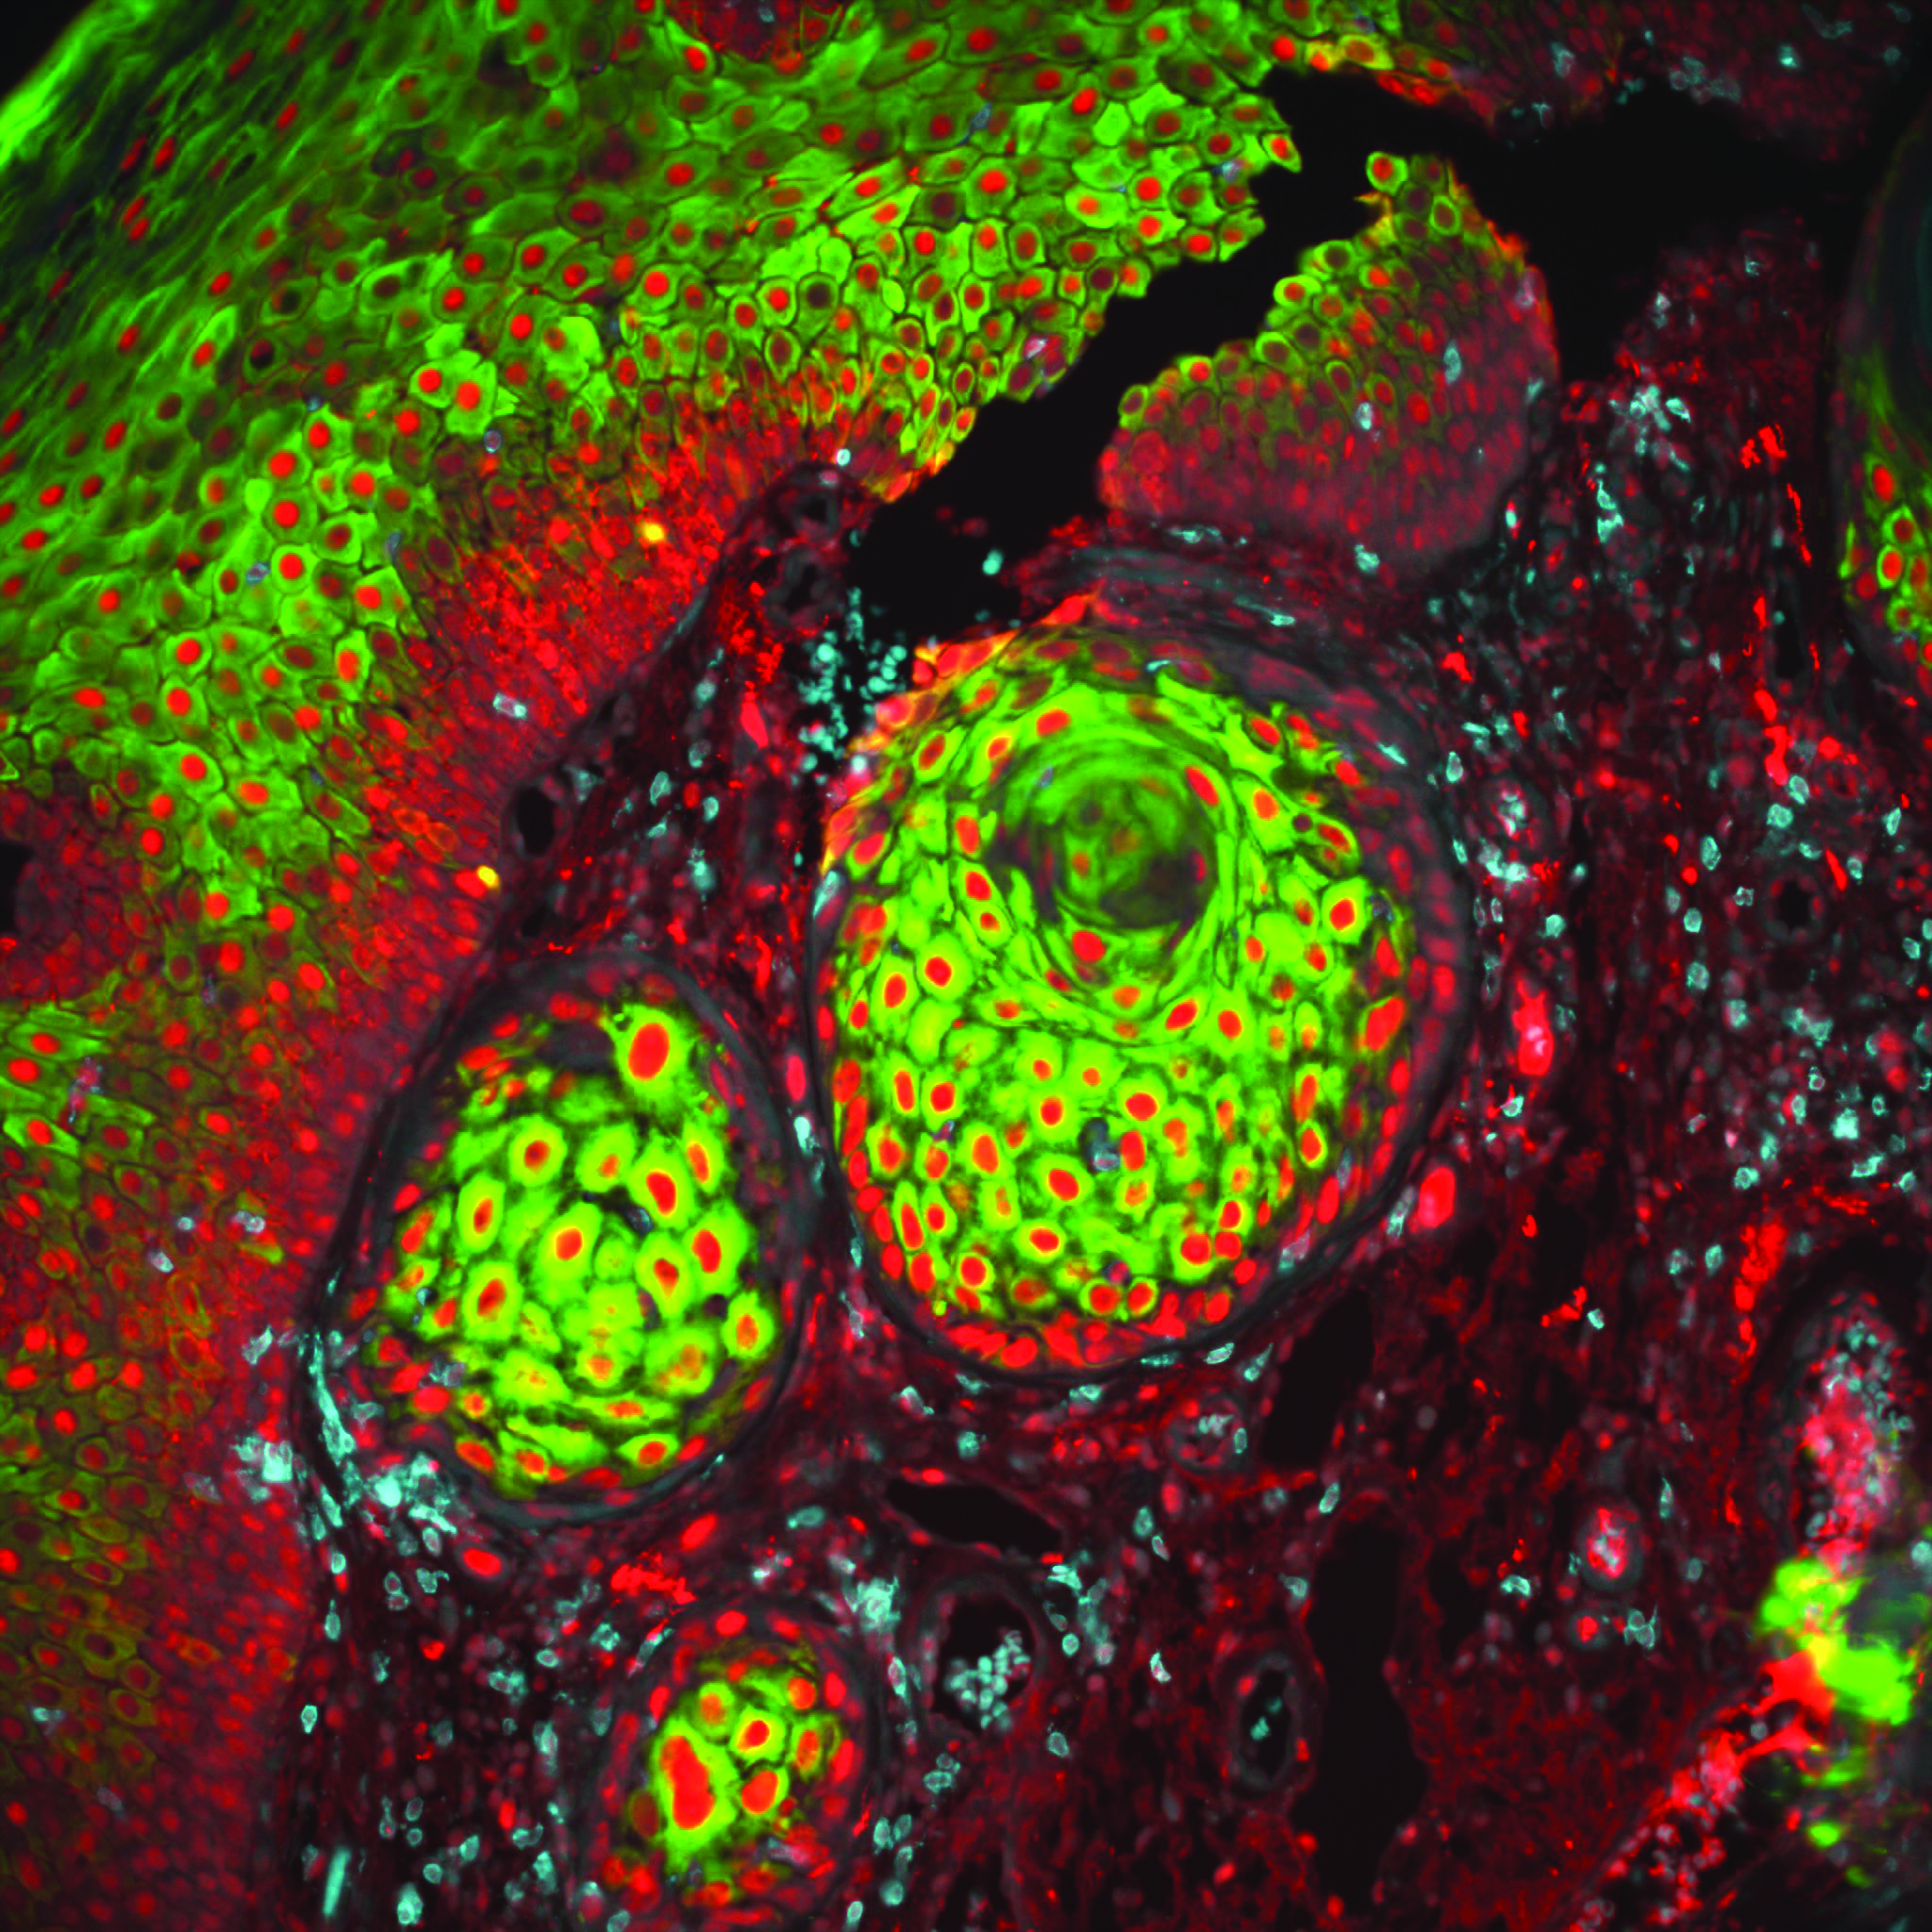 Green, red, and black image of a cell